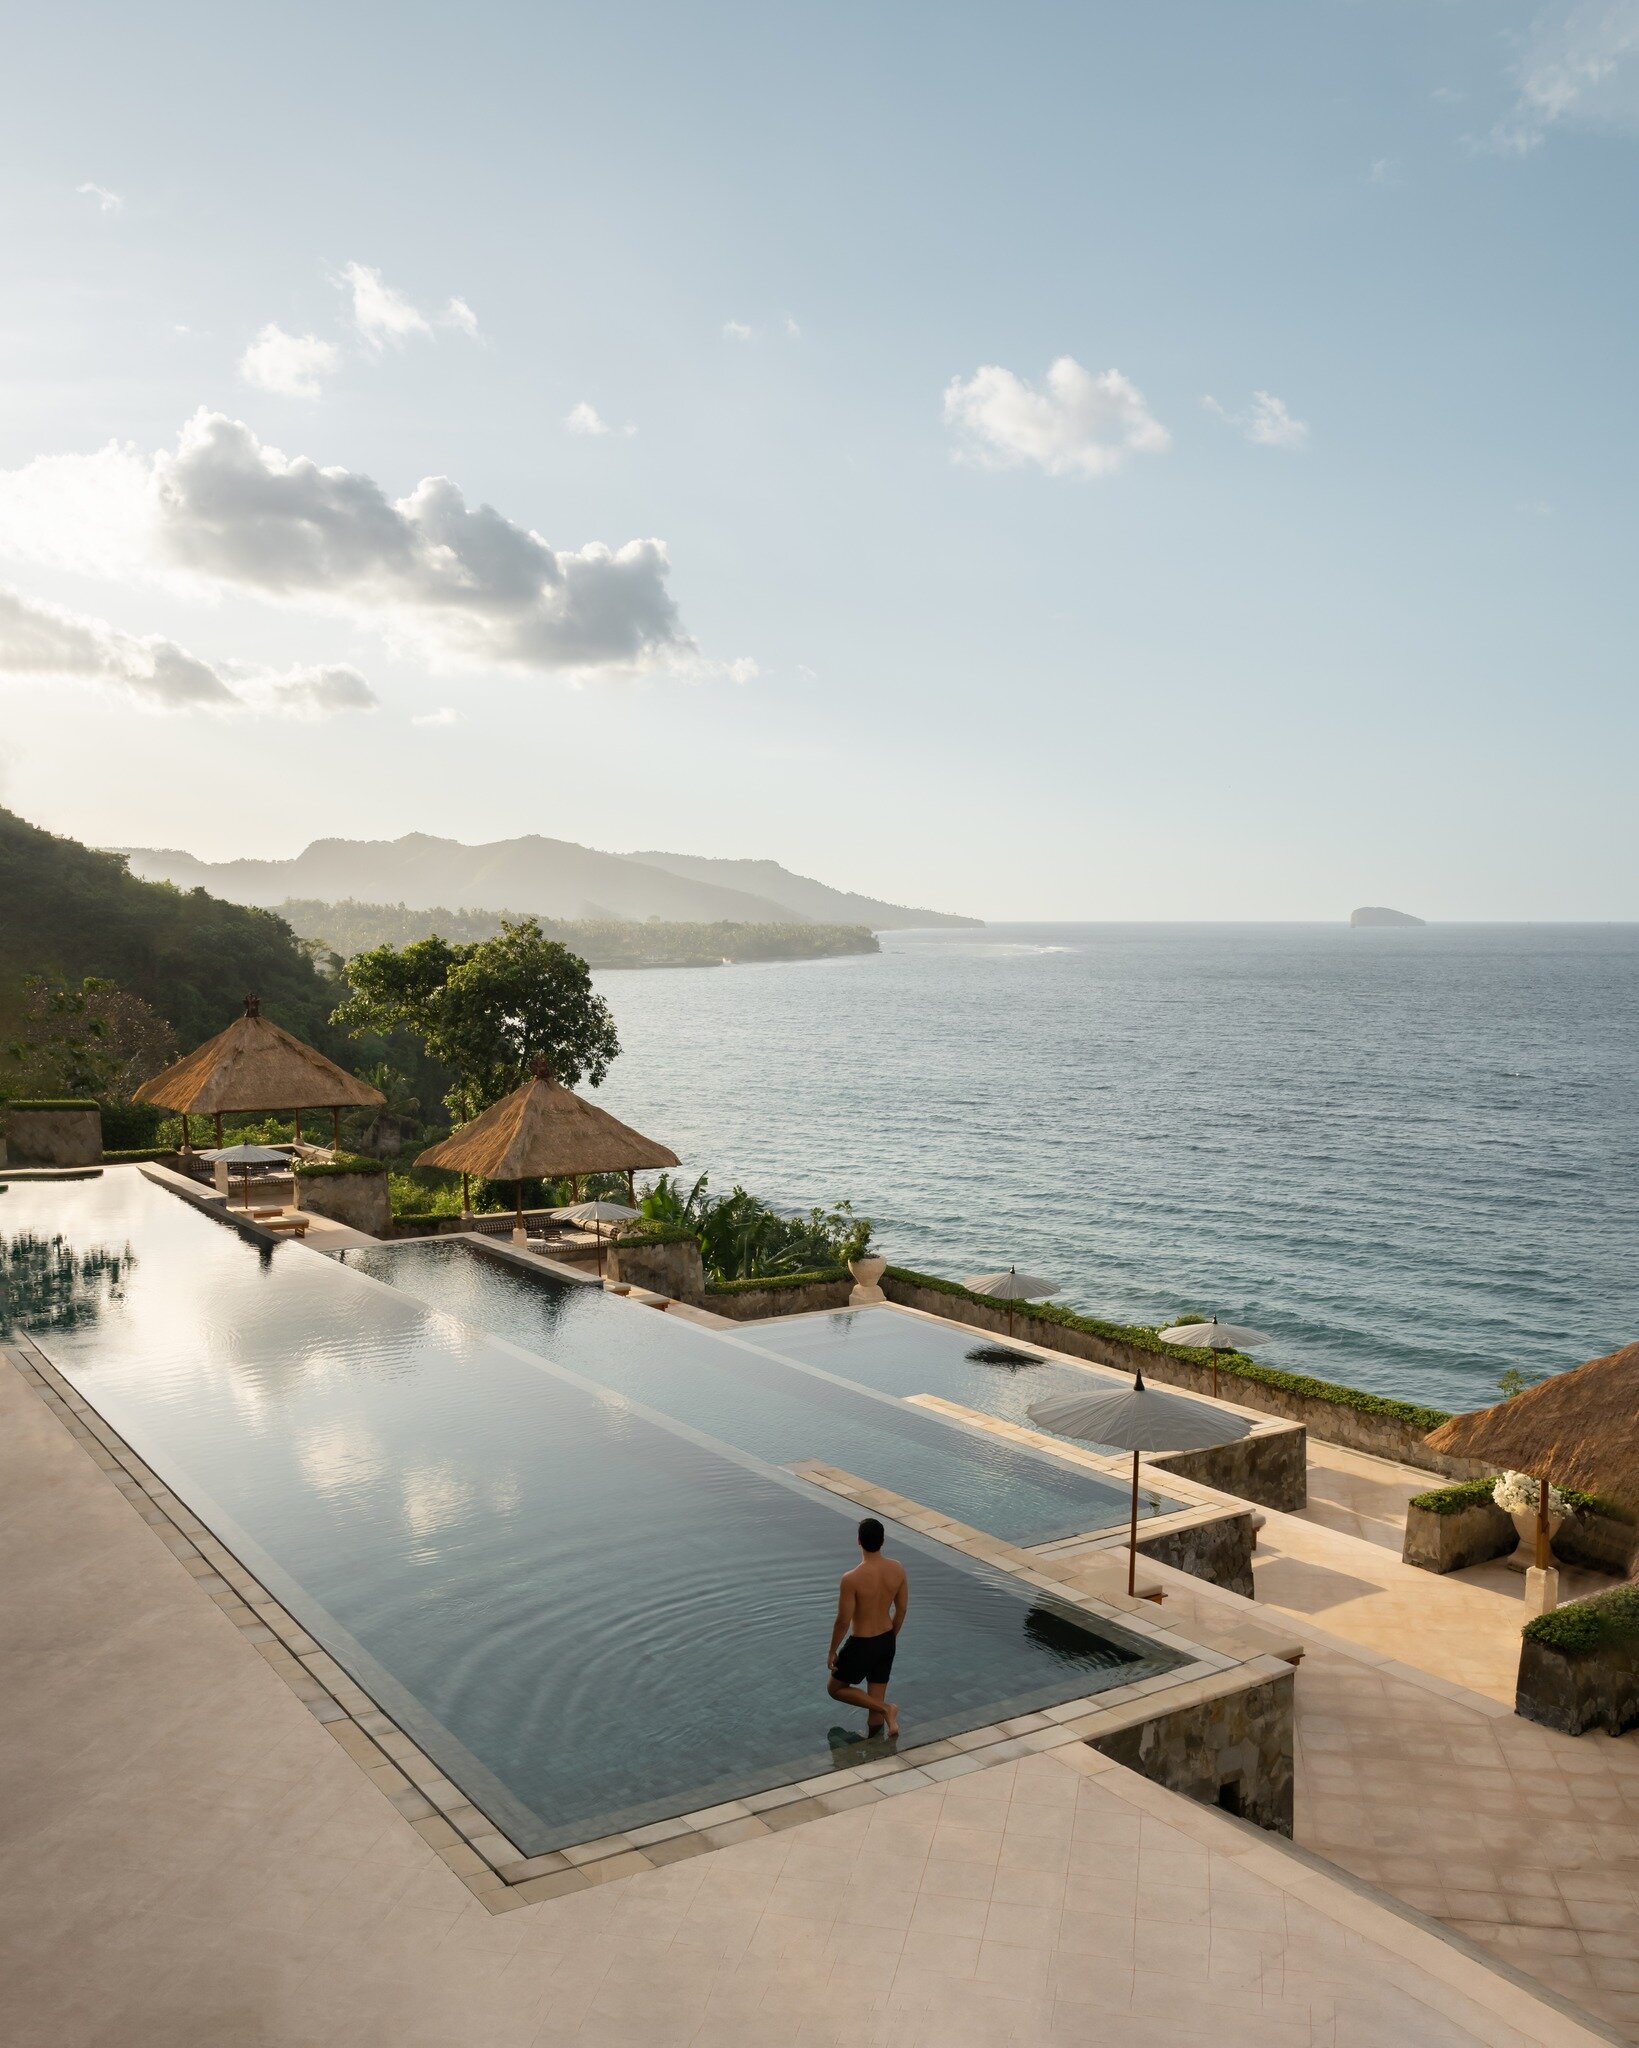 Join us on an epic visual journey to @amankila, one of Aman Hotels&rsquo; most iconic properties perched above a breathtaking coastline in Bali, Indonesia.

With its dramatic three-tier infinity pool, unparalleled ocean vistas, and secluded suites ne